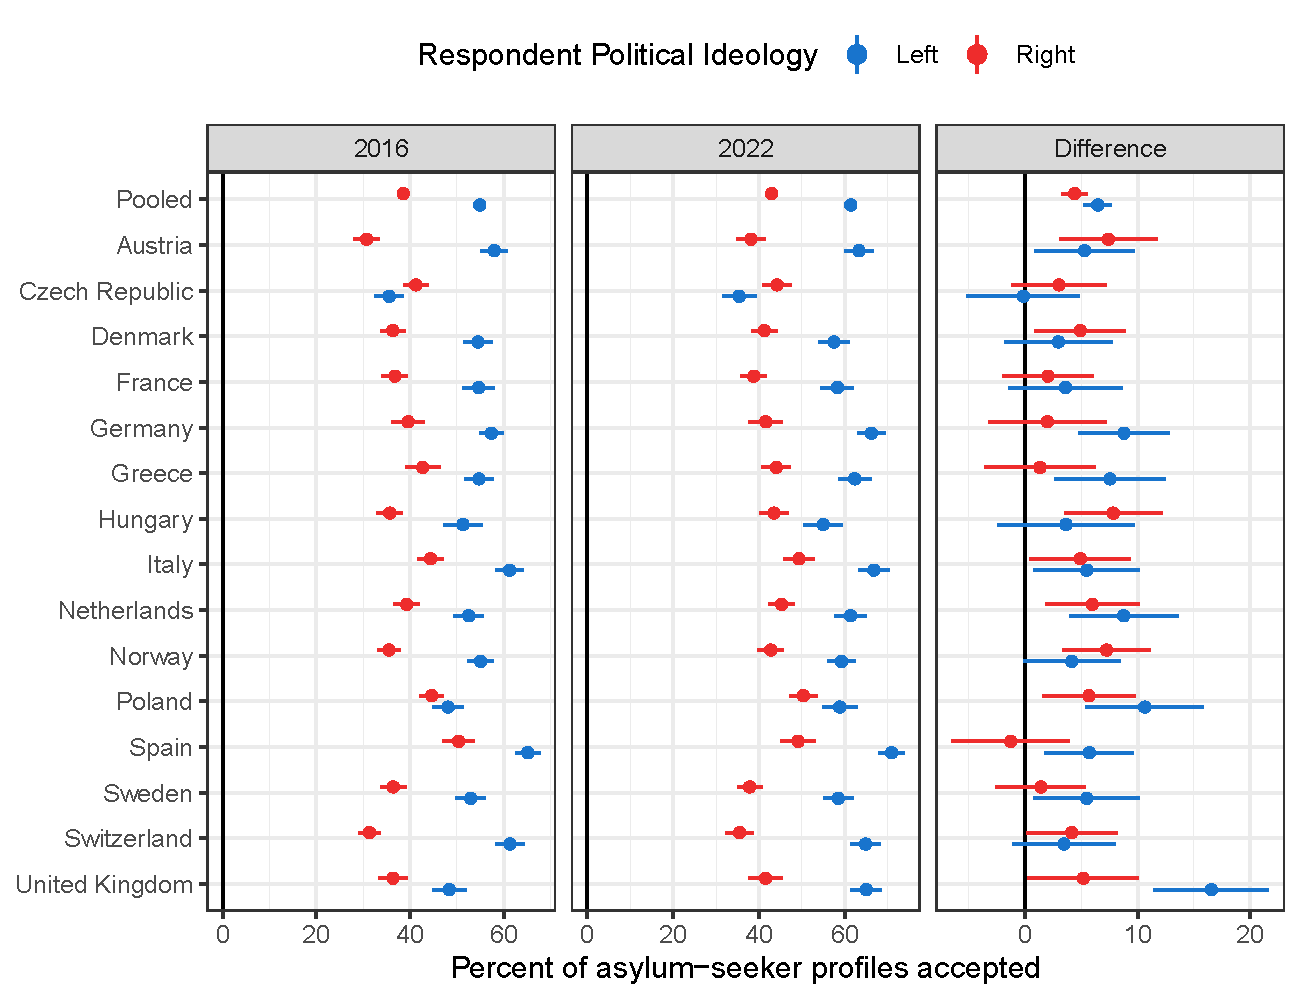 Enlarged view: Acceptance towards asylum seekers broken down by the respective European countries. Right-wing and left-wing political attitudes are contrasted.